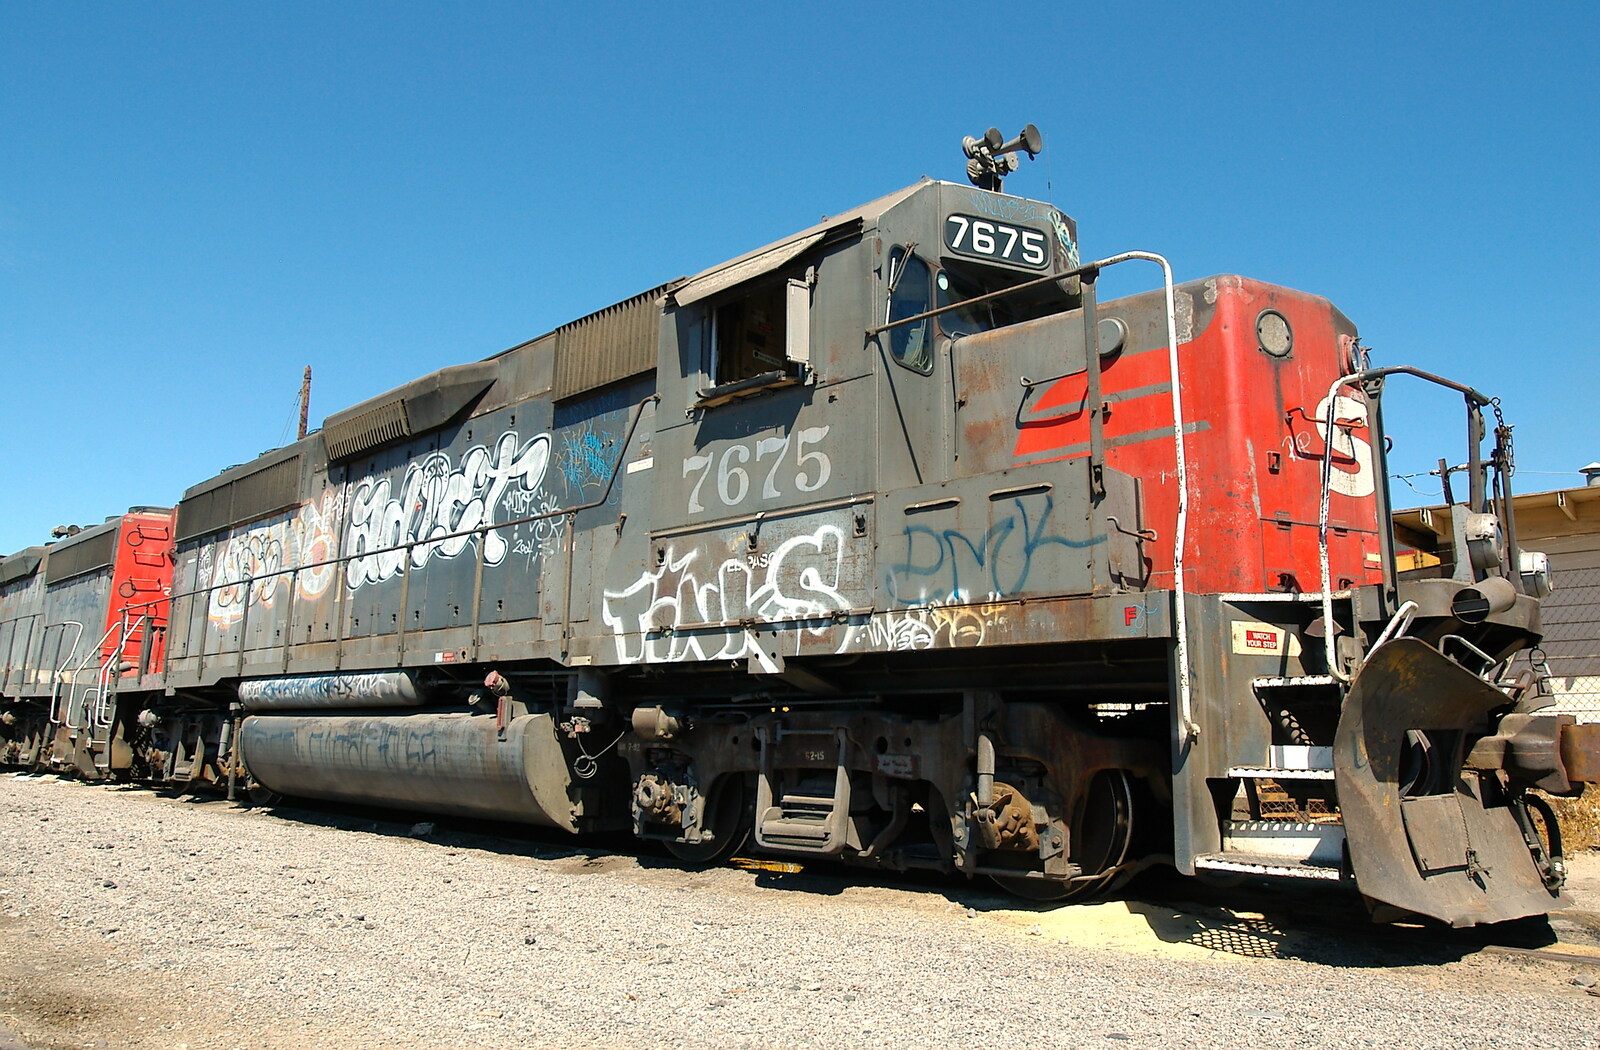 Loco 7675 - a big lump of metal from California Desert: El Centro, Imperial Valley, California, US - 24th September 2005